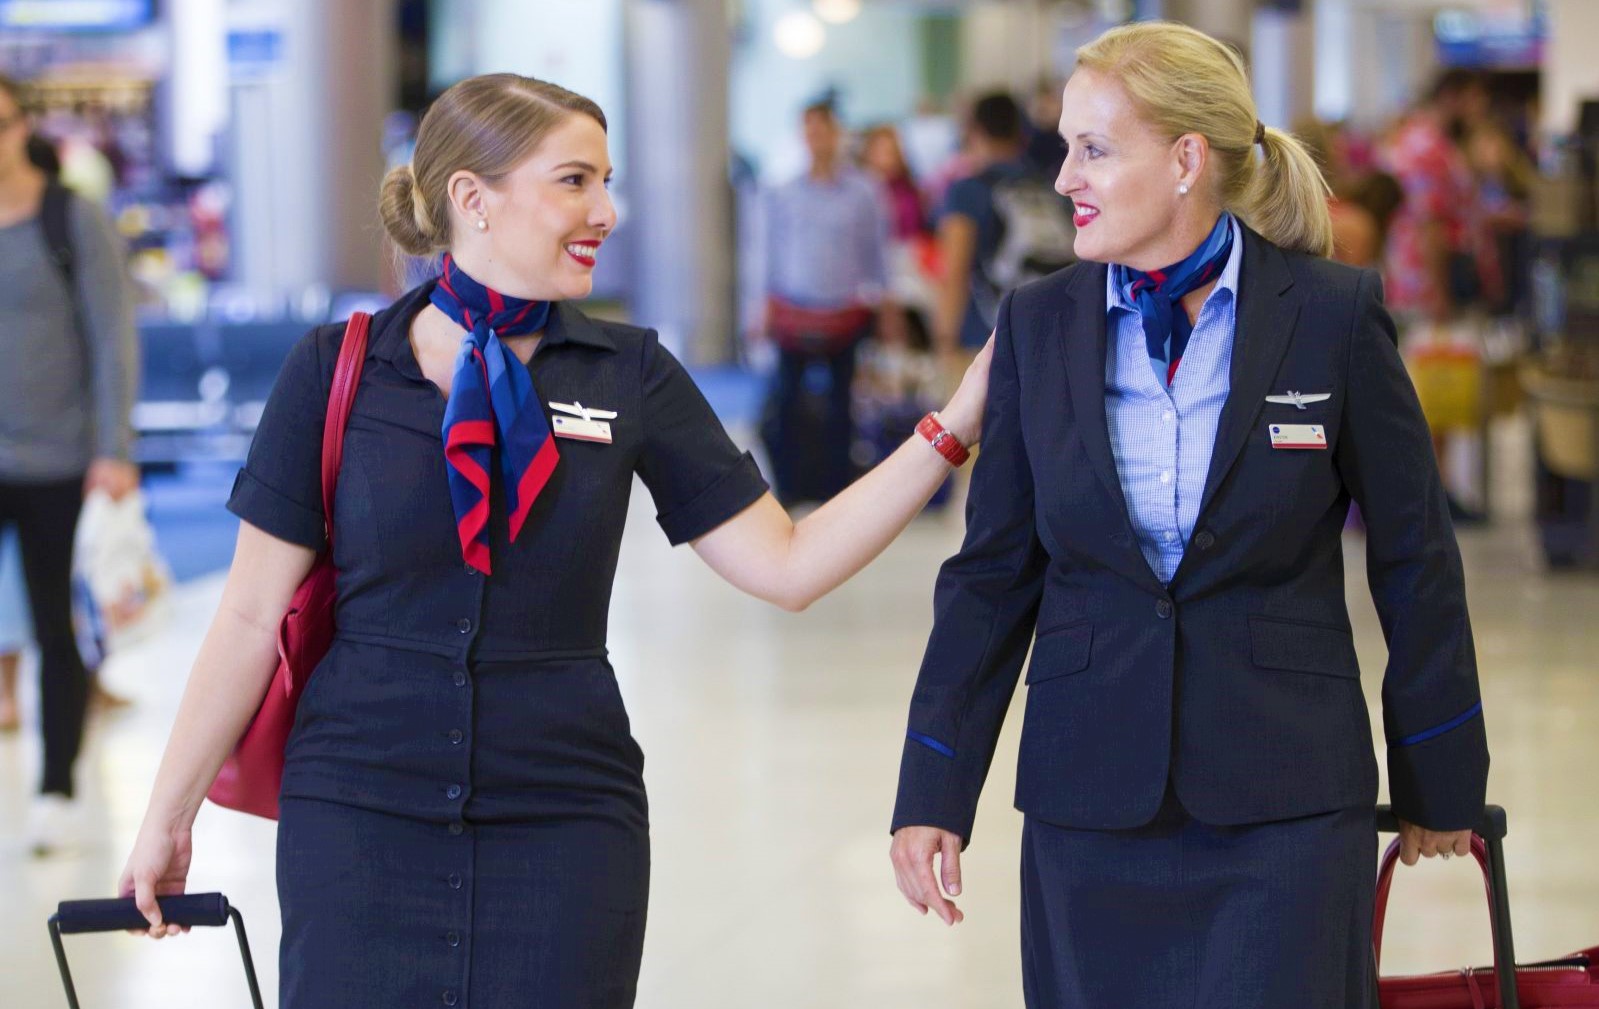 Triple pay awaits American Airlines Flight Attendants , if they work